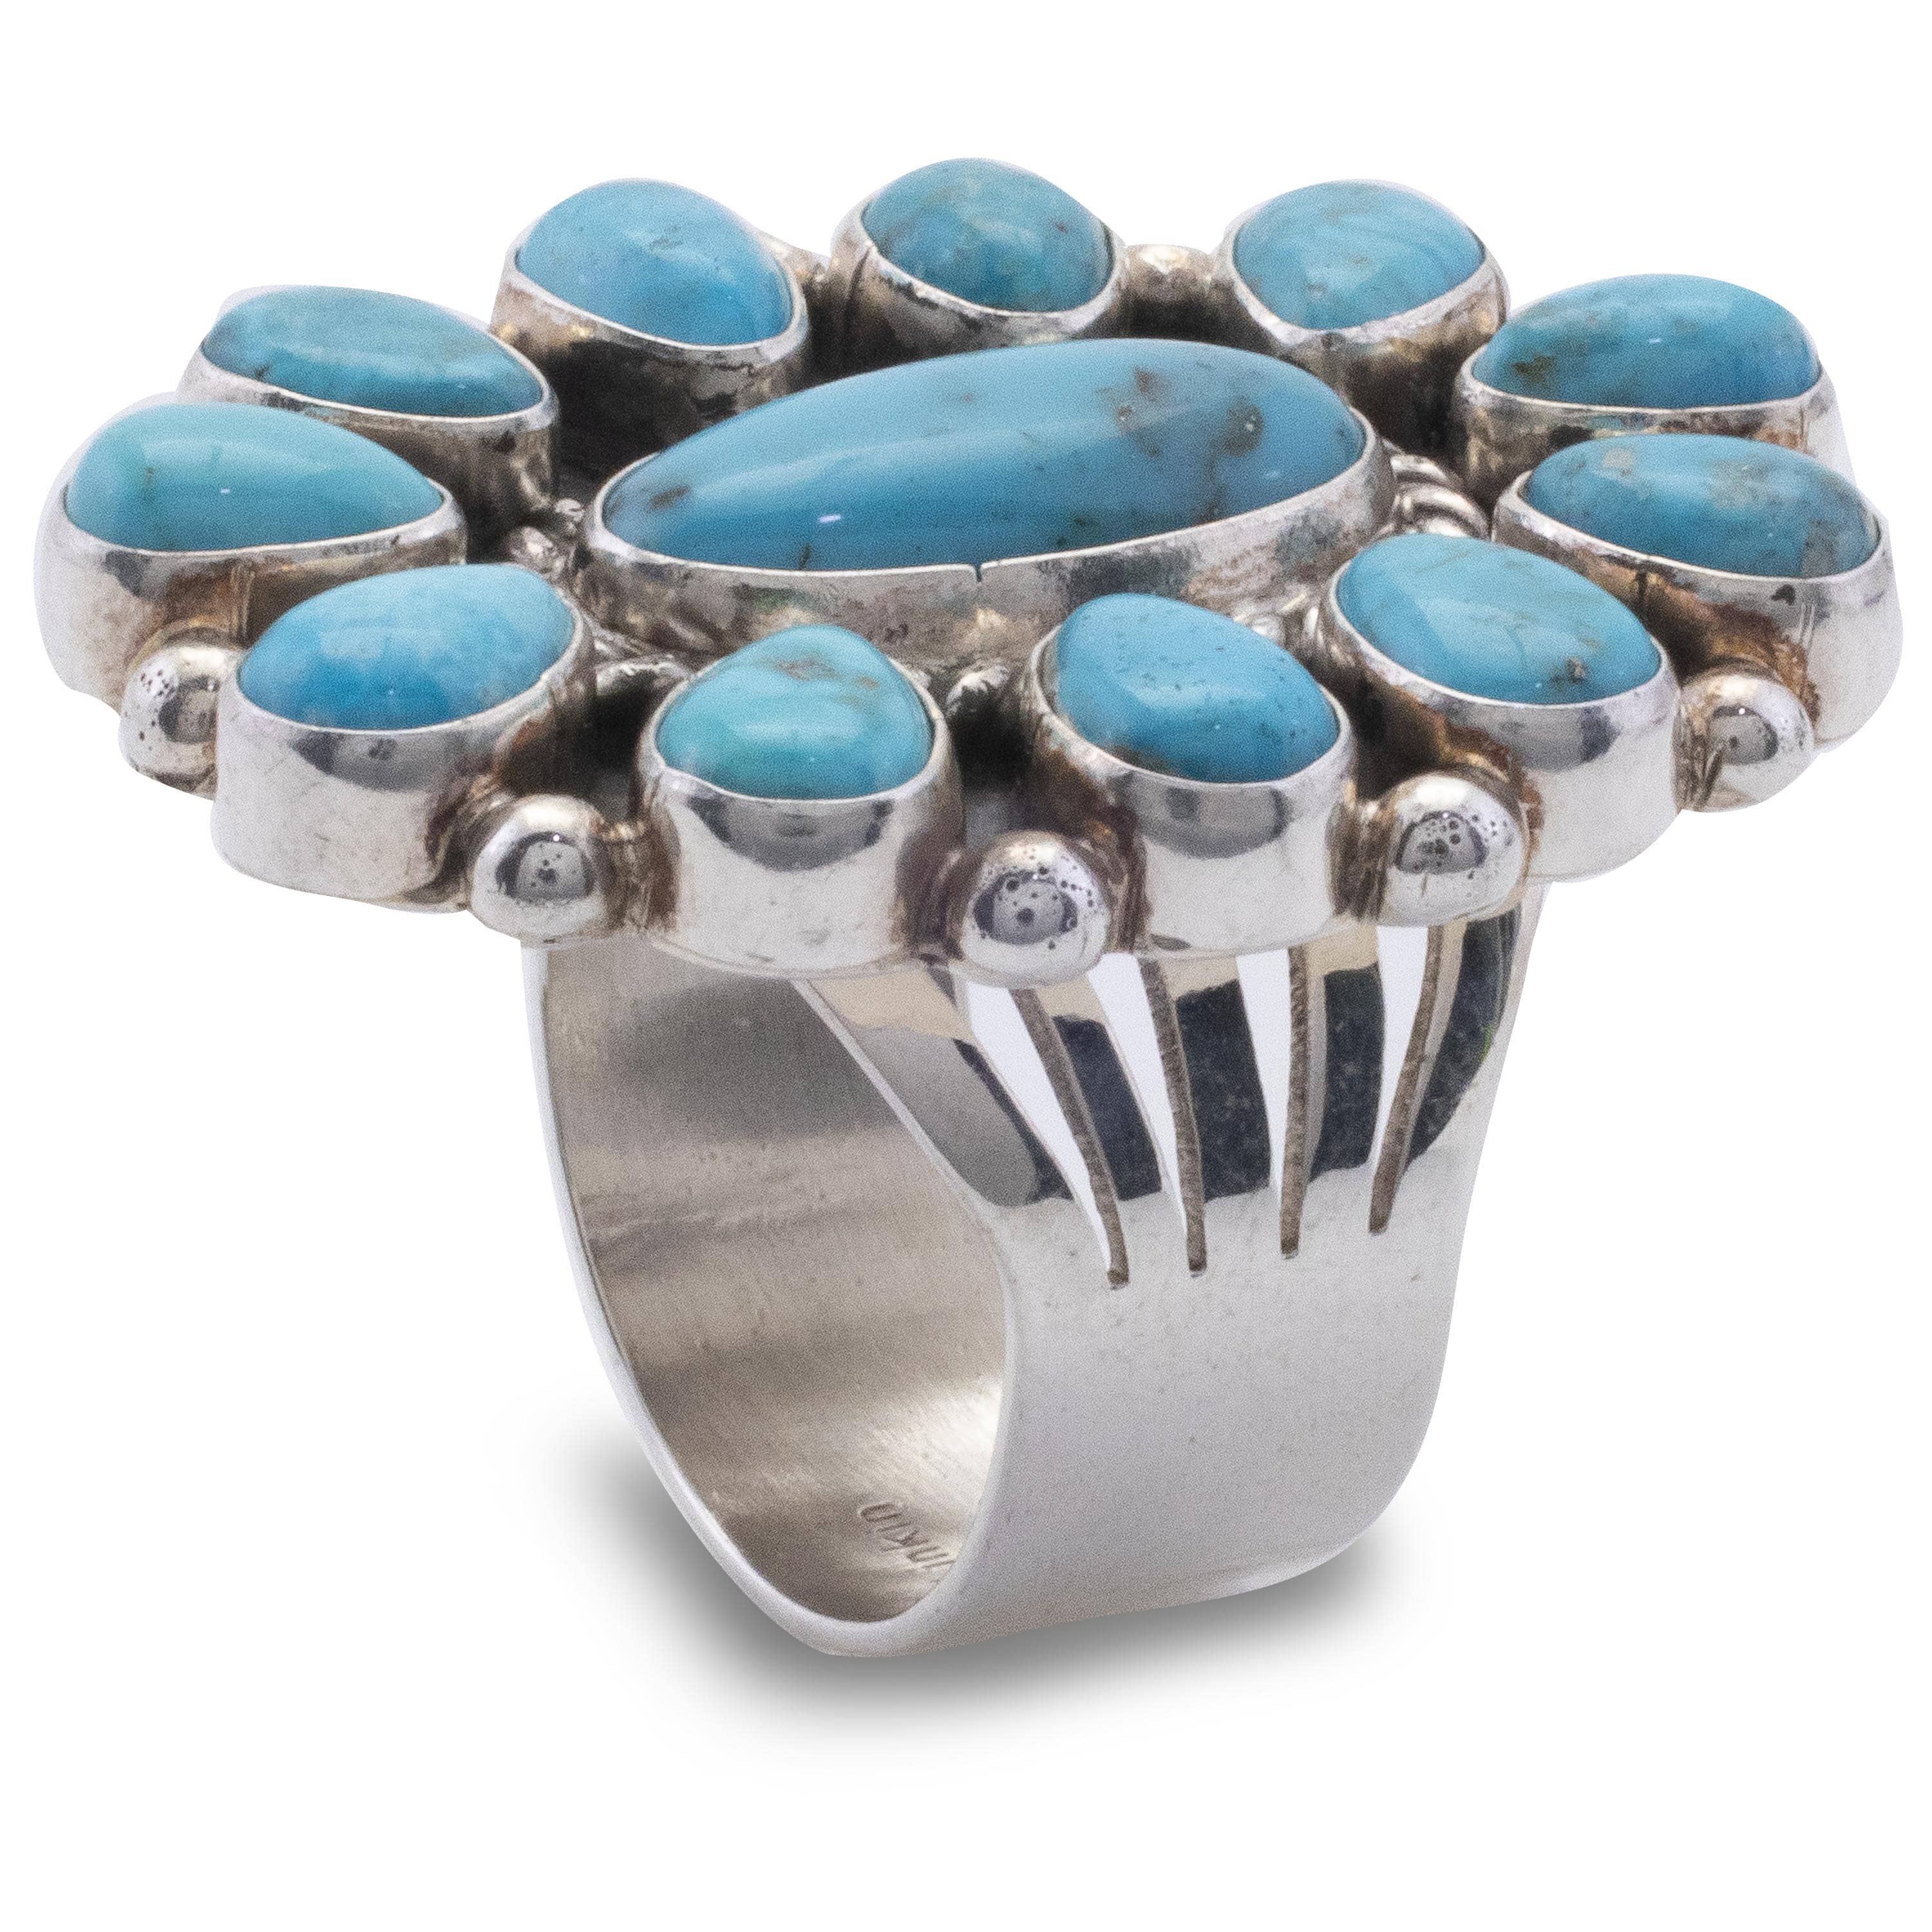 Kalifano Native American Jewelry 9.5 Lucinda Linkin Navajo Sonoran Gold Turquoise USA Native American Made 925 Sterling Silver Ring NAR1400.020.95